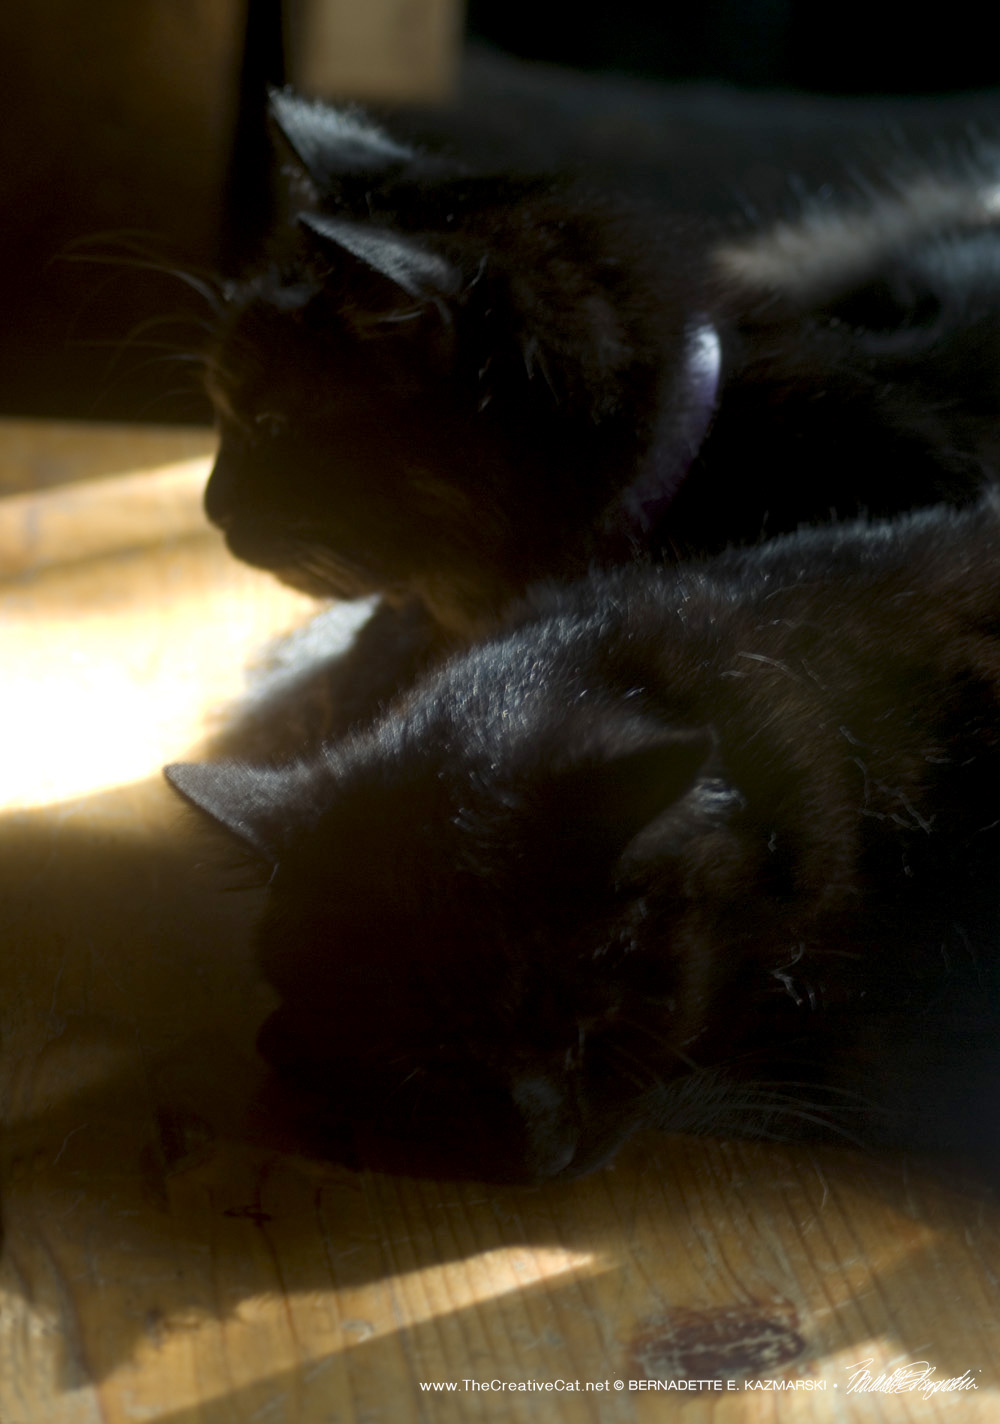 Basil and Bella have a good nap in the sun, on sunnier days.